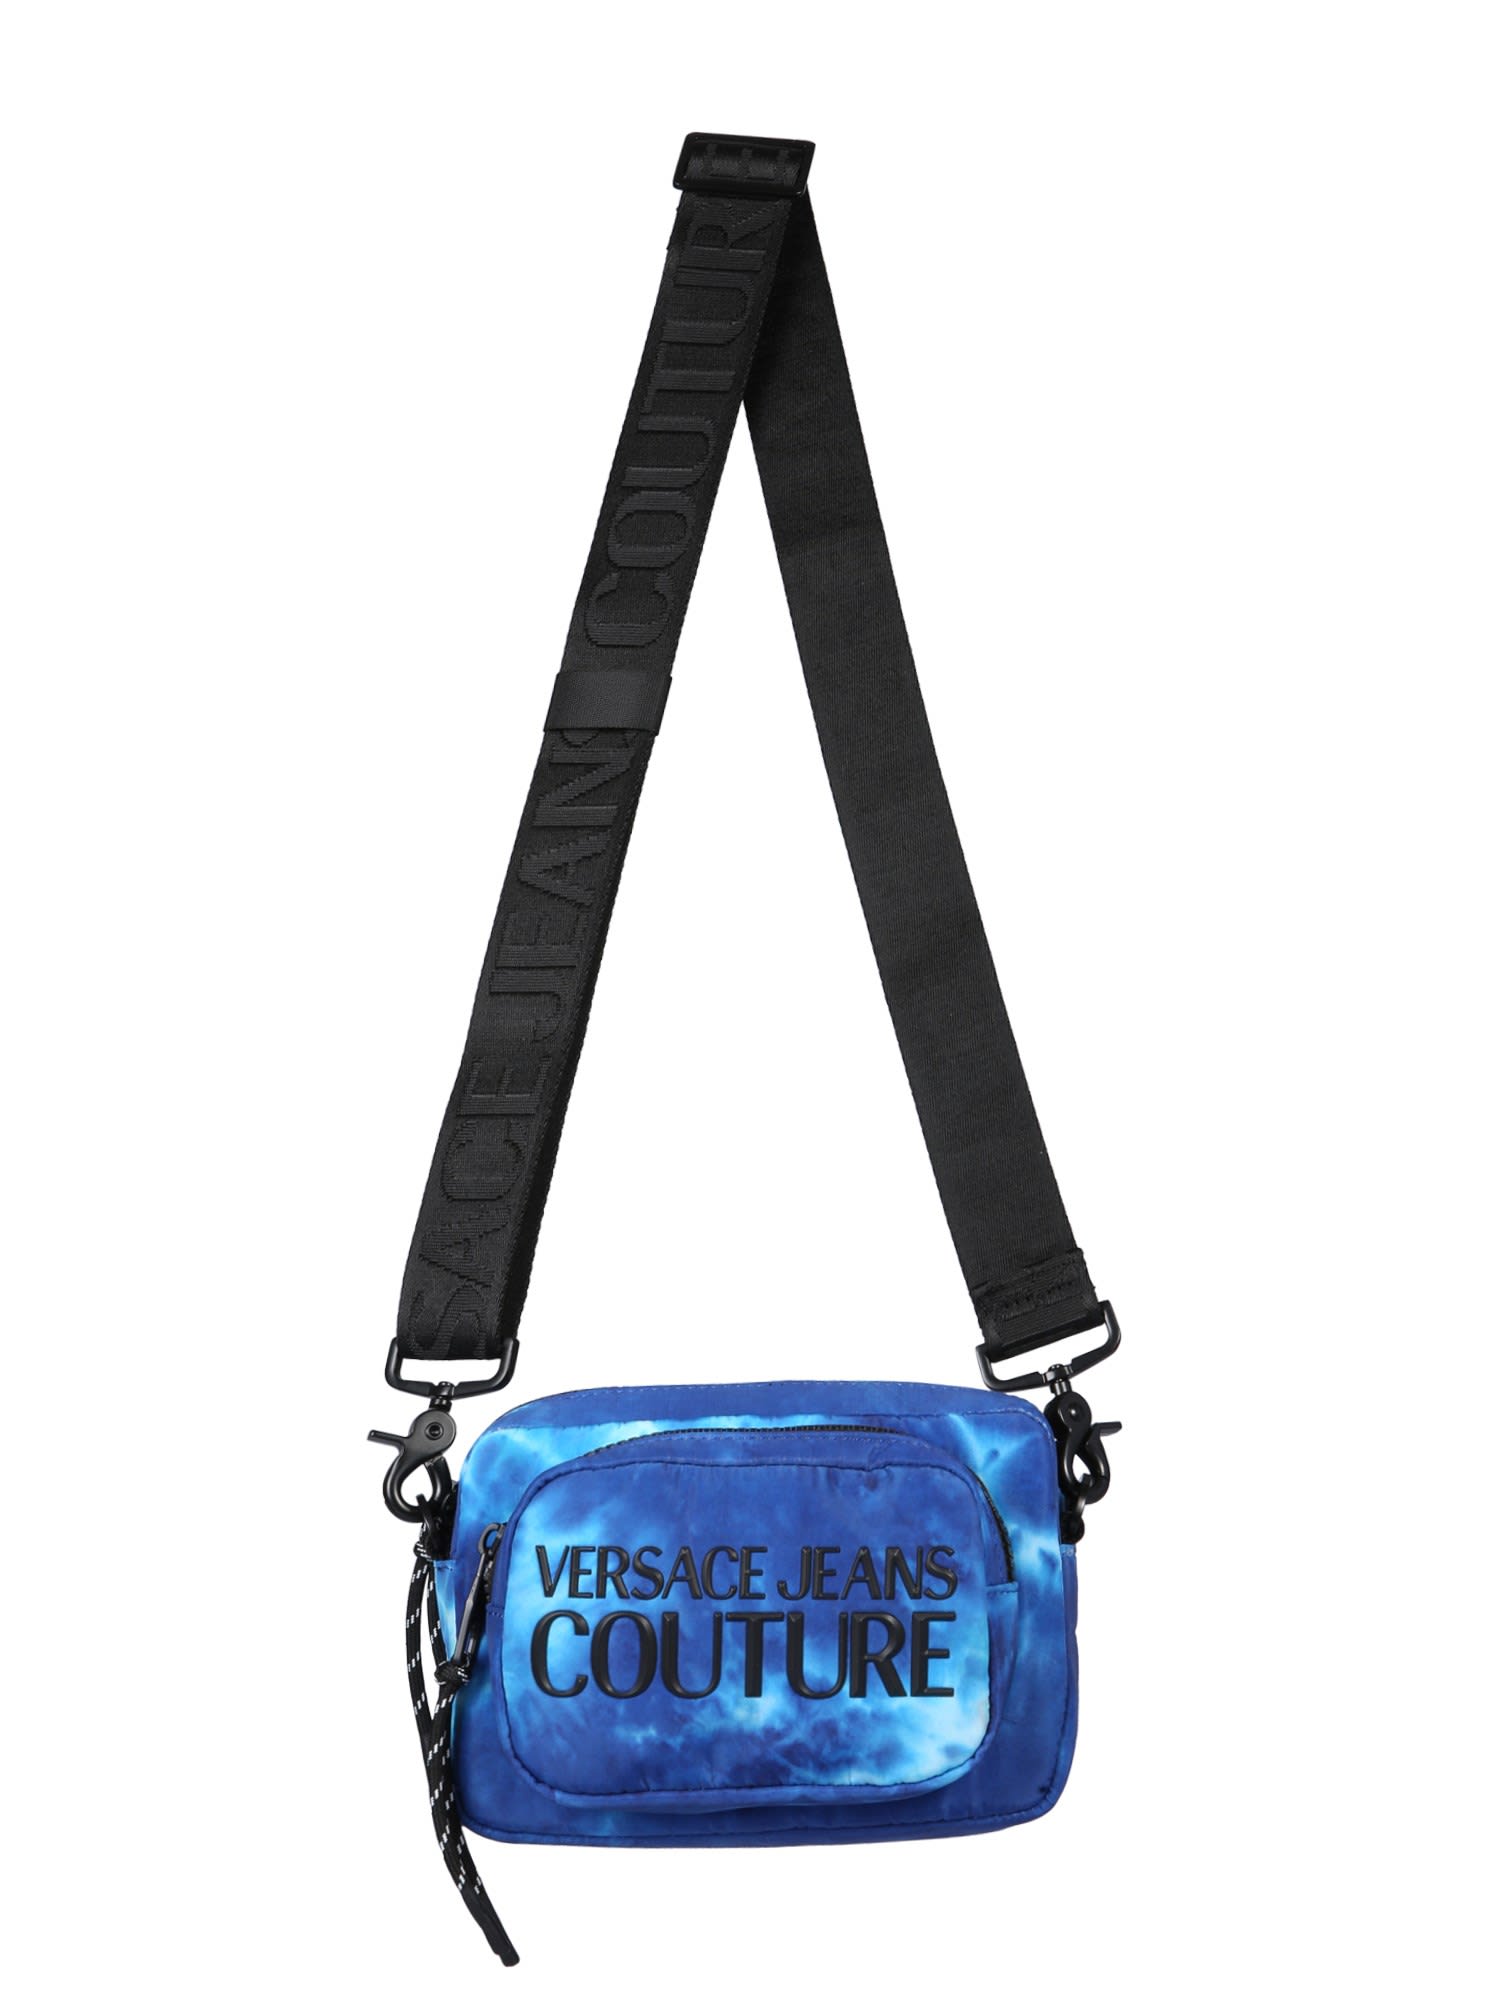 Versace Jeans Couture Tye And Dye Shoulder Bag